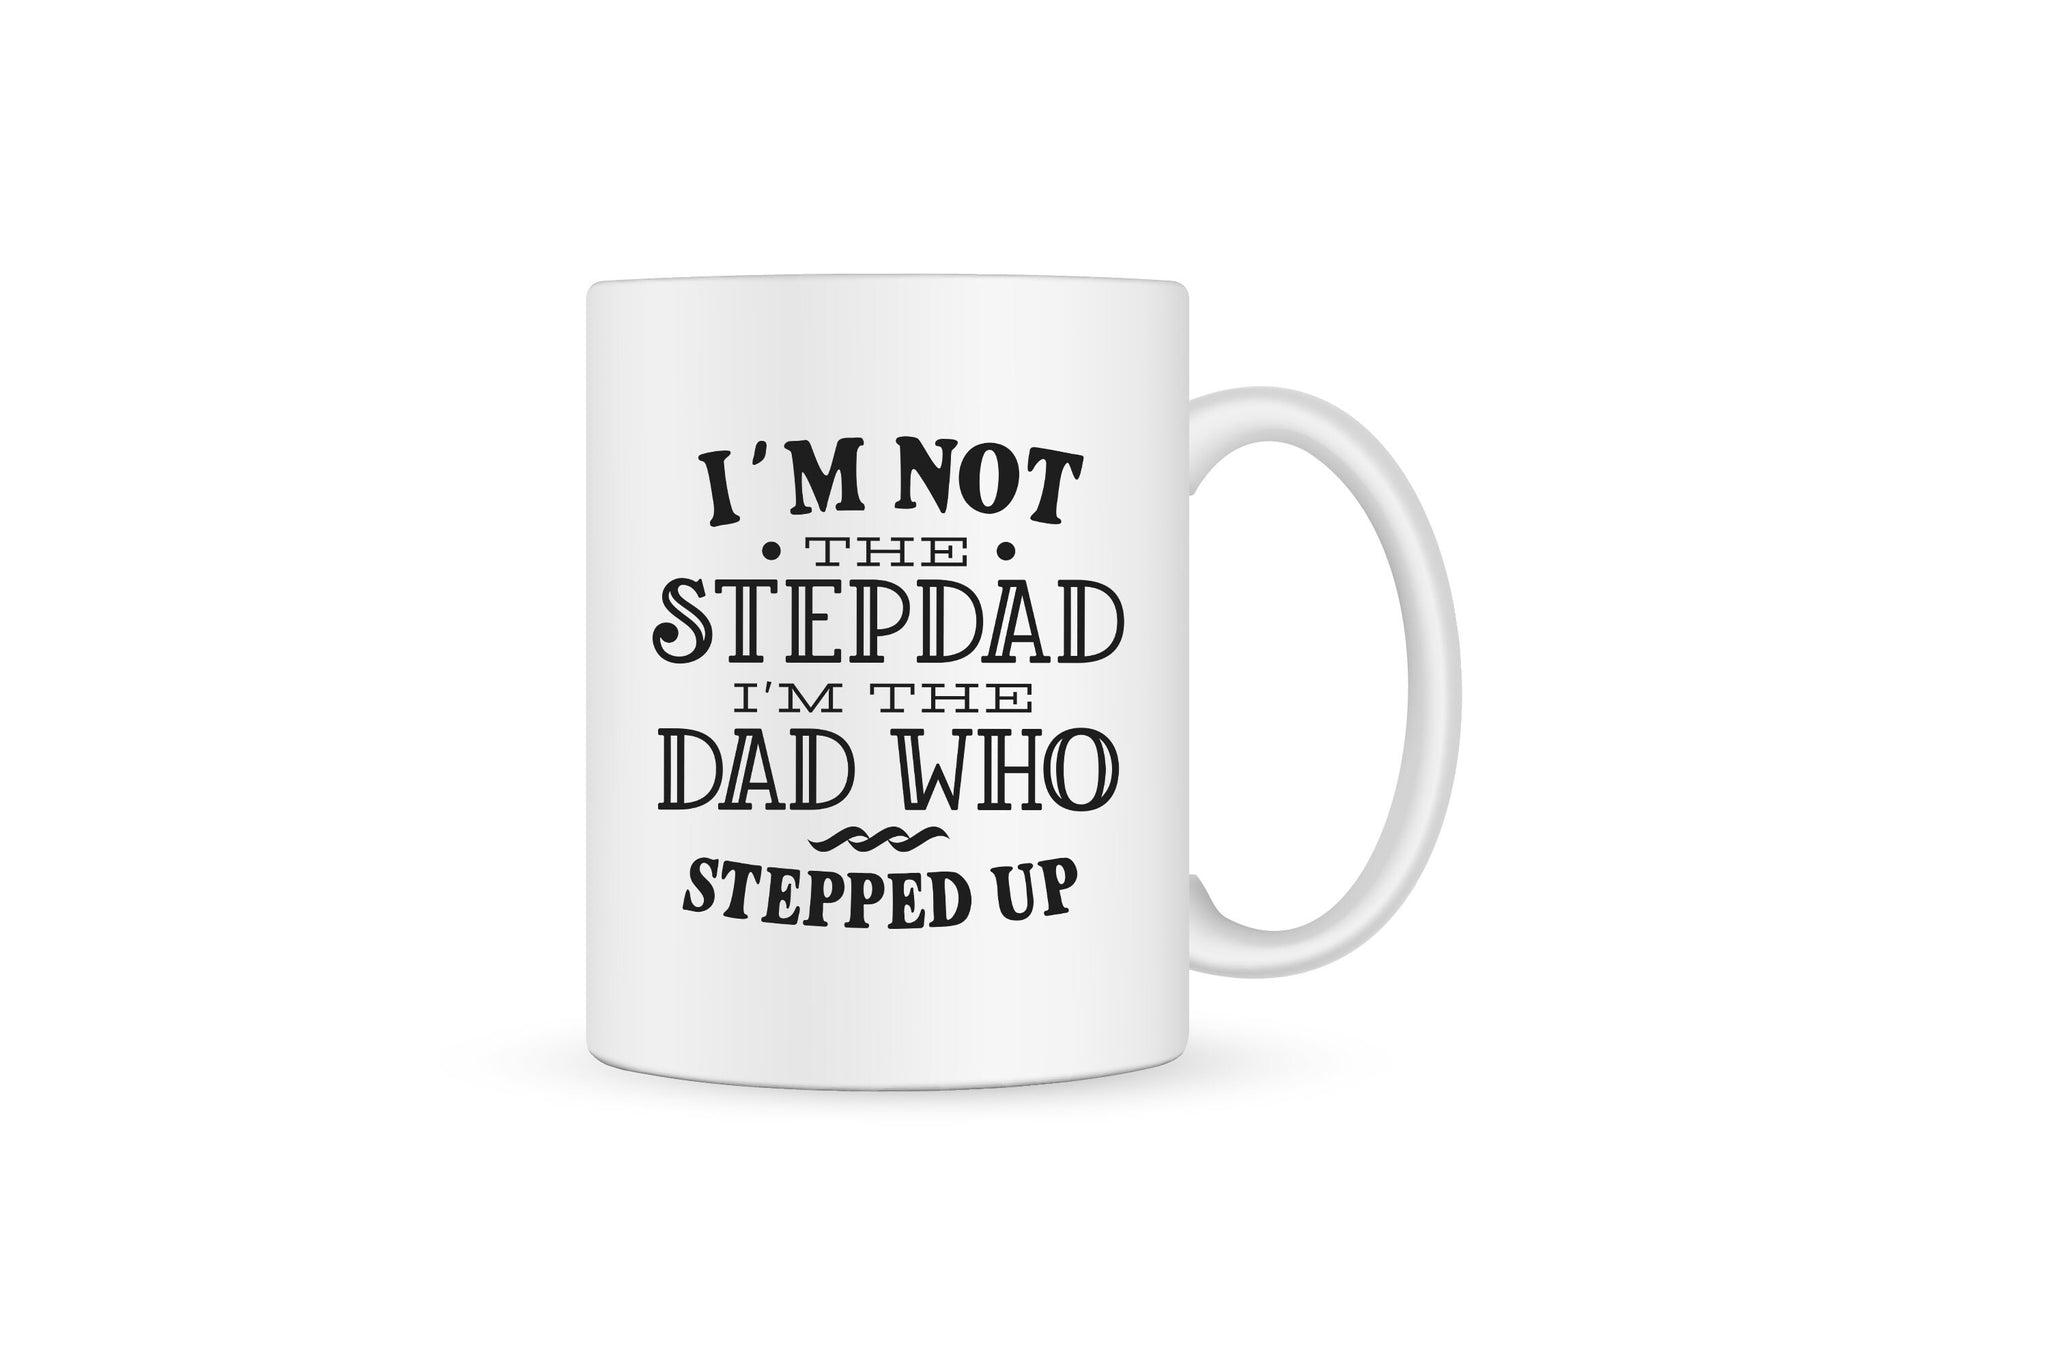 I'm Not The Stepdad I'm The Dad Who Stepped Up Fathers Day Coffee Mug Gift For Stepdad, The Man Who Stepped Up Meaningful Gift For Stepdad